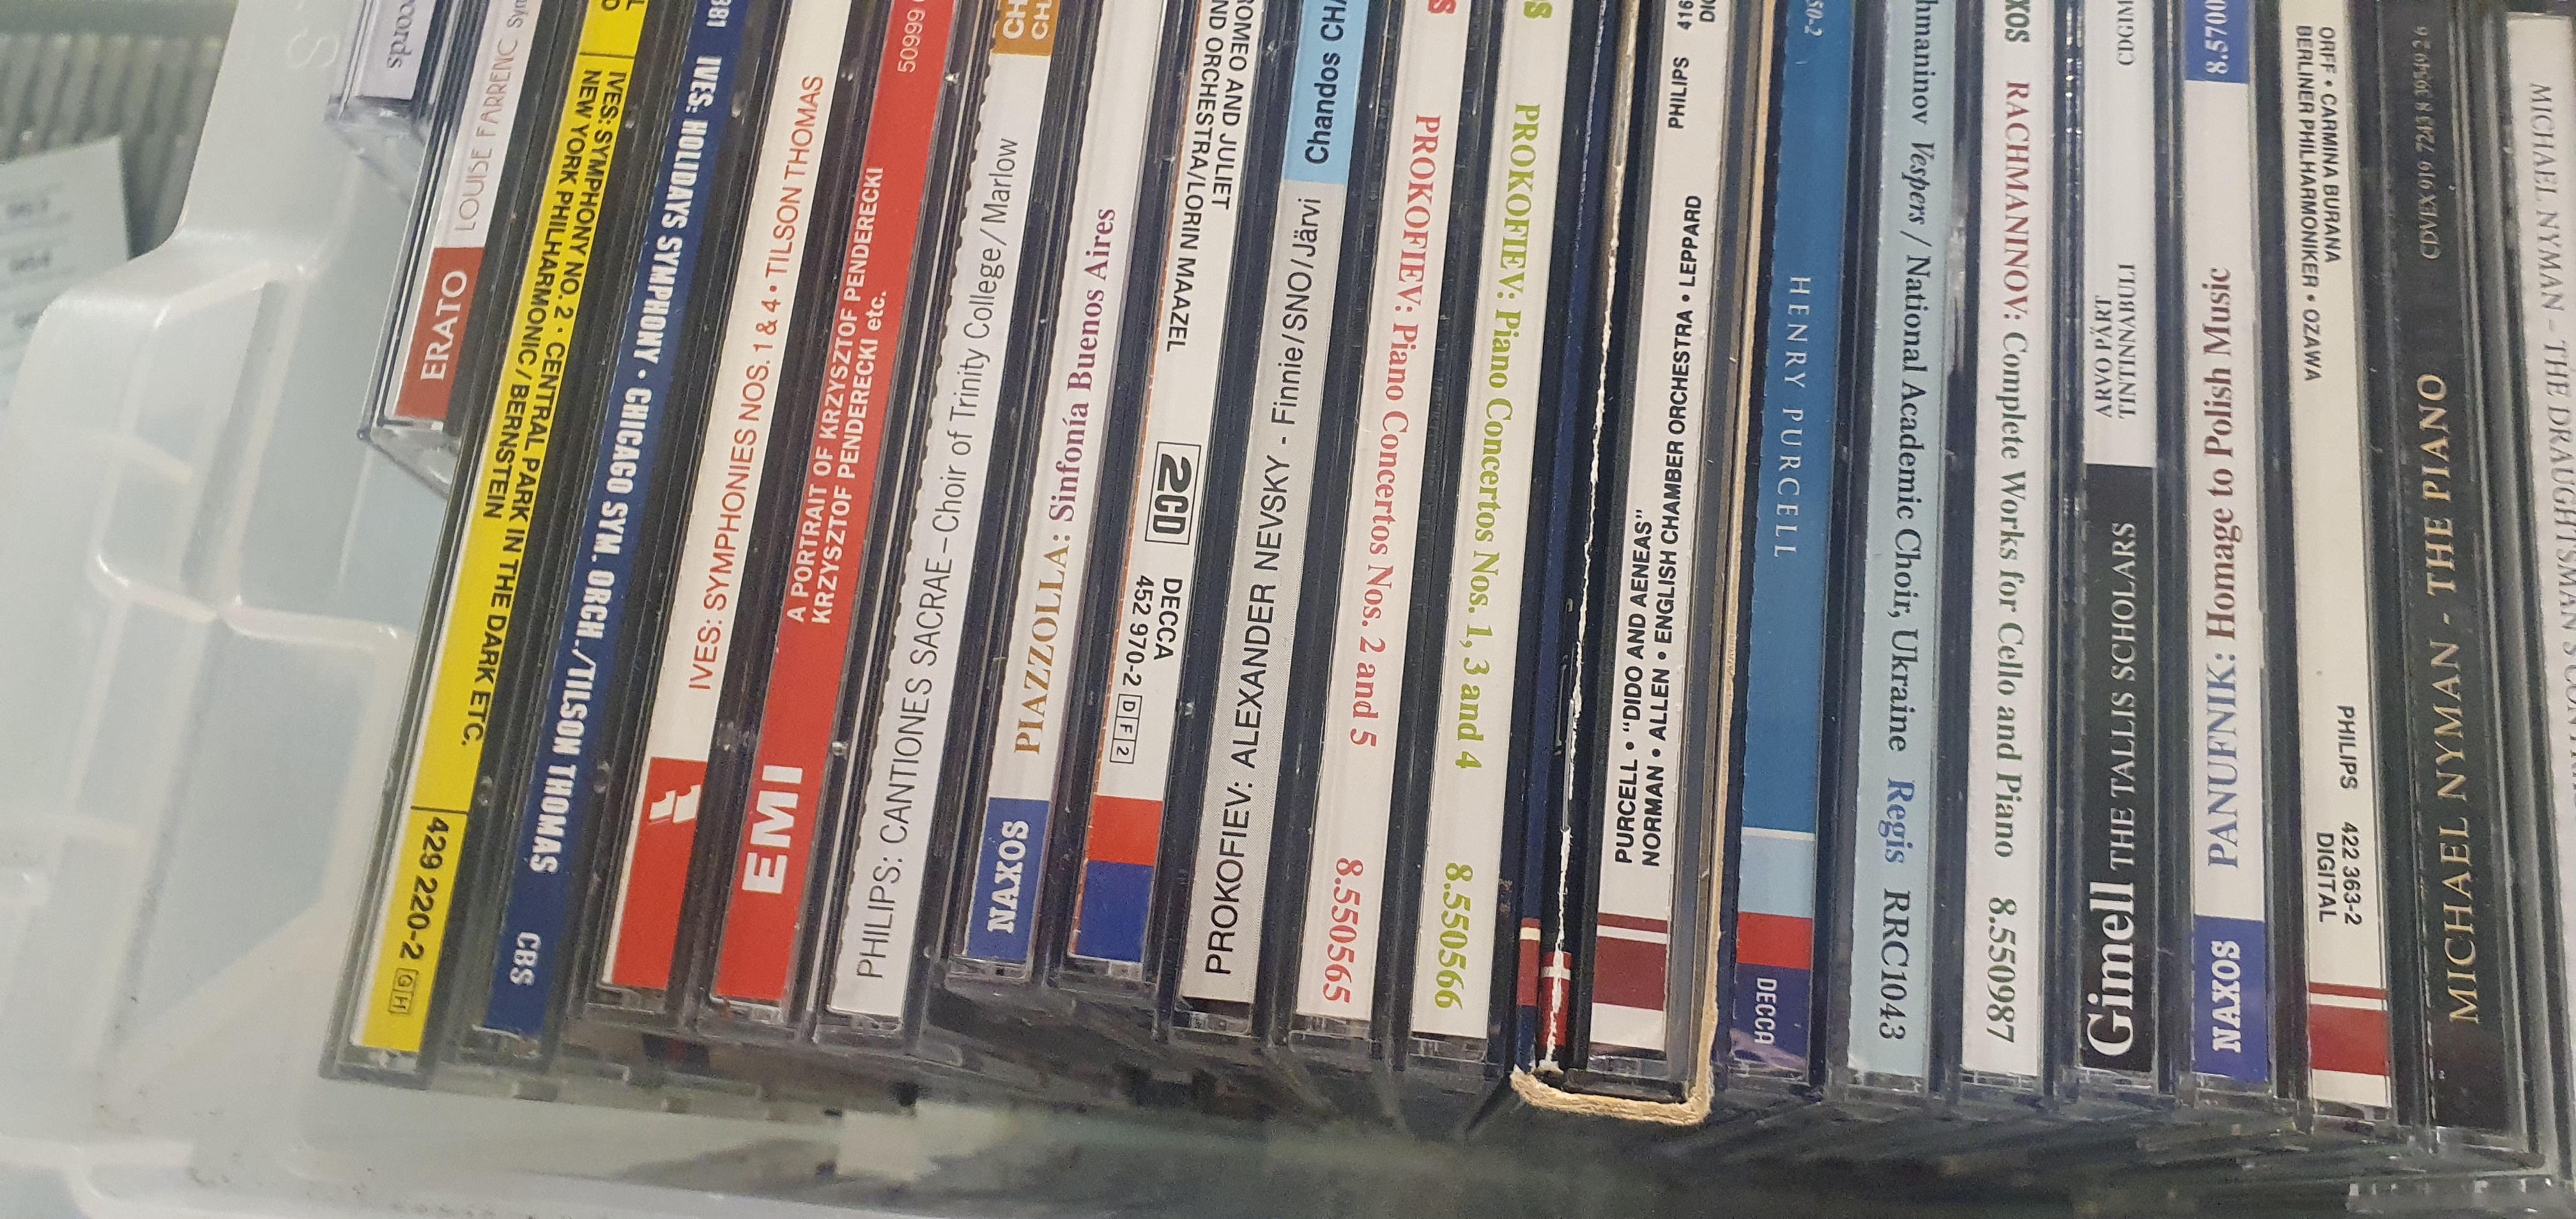 LARGE COLLECTION OF APPROXIMATELY 100 MUSIC CD'S - Image 4 of 4